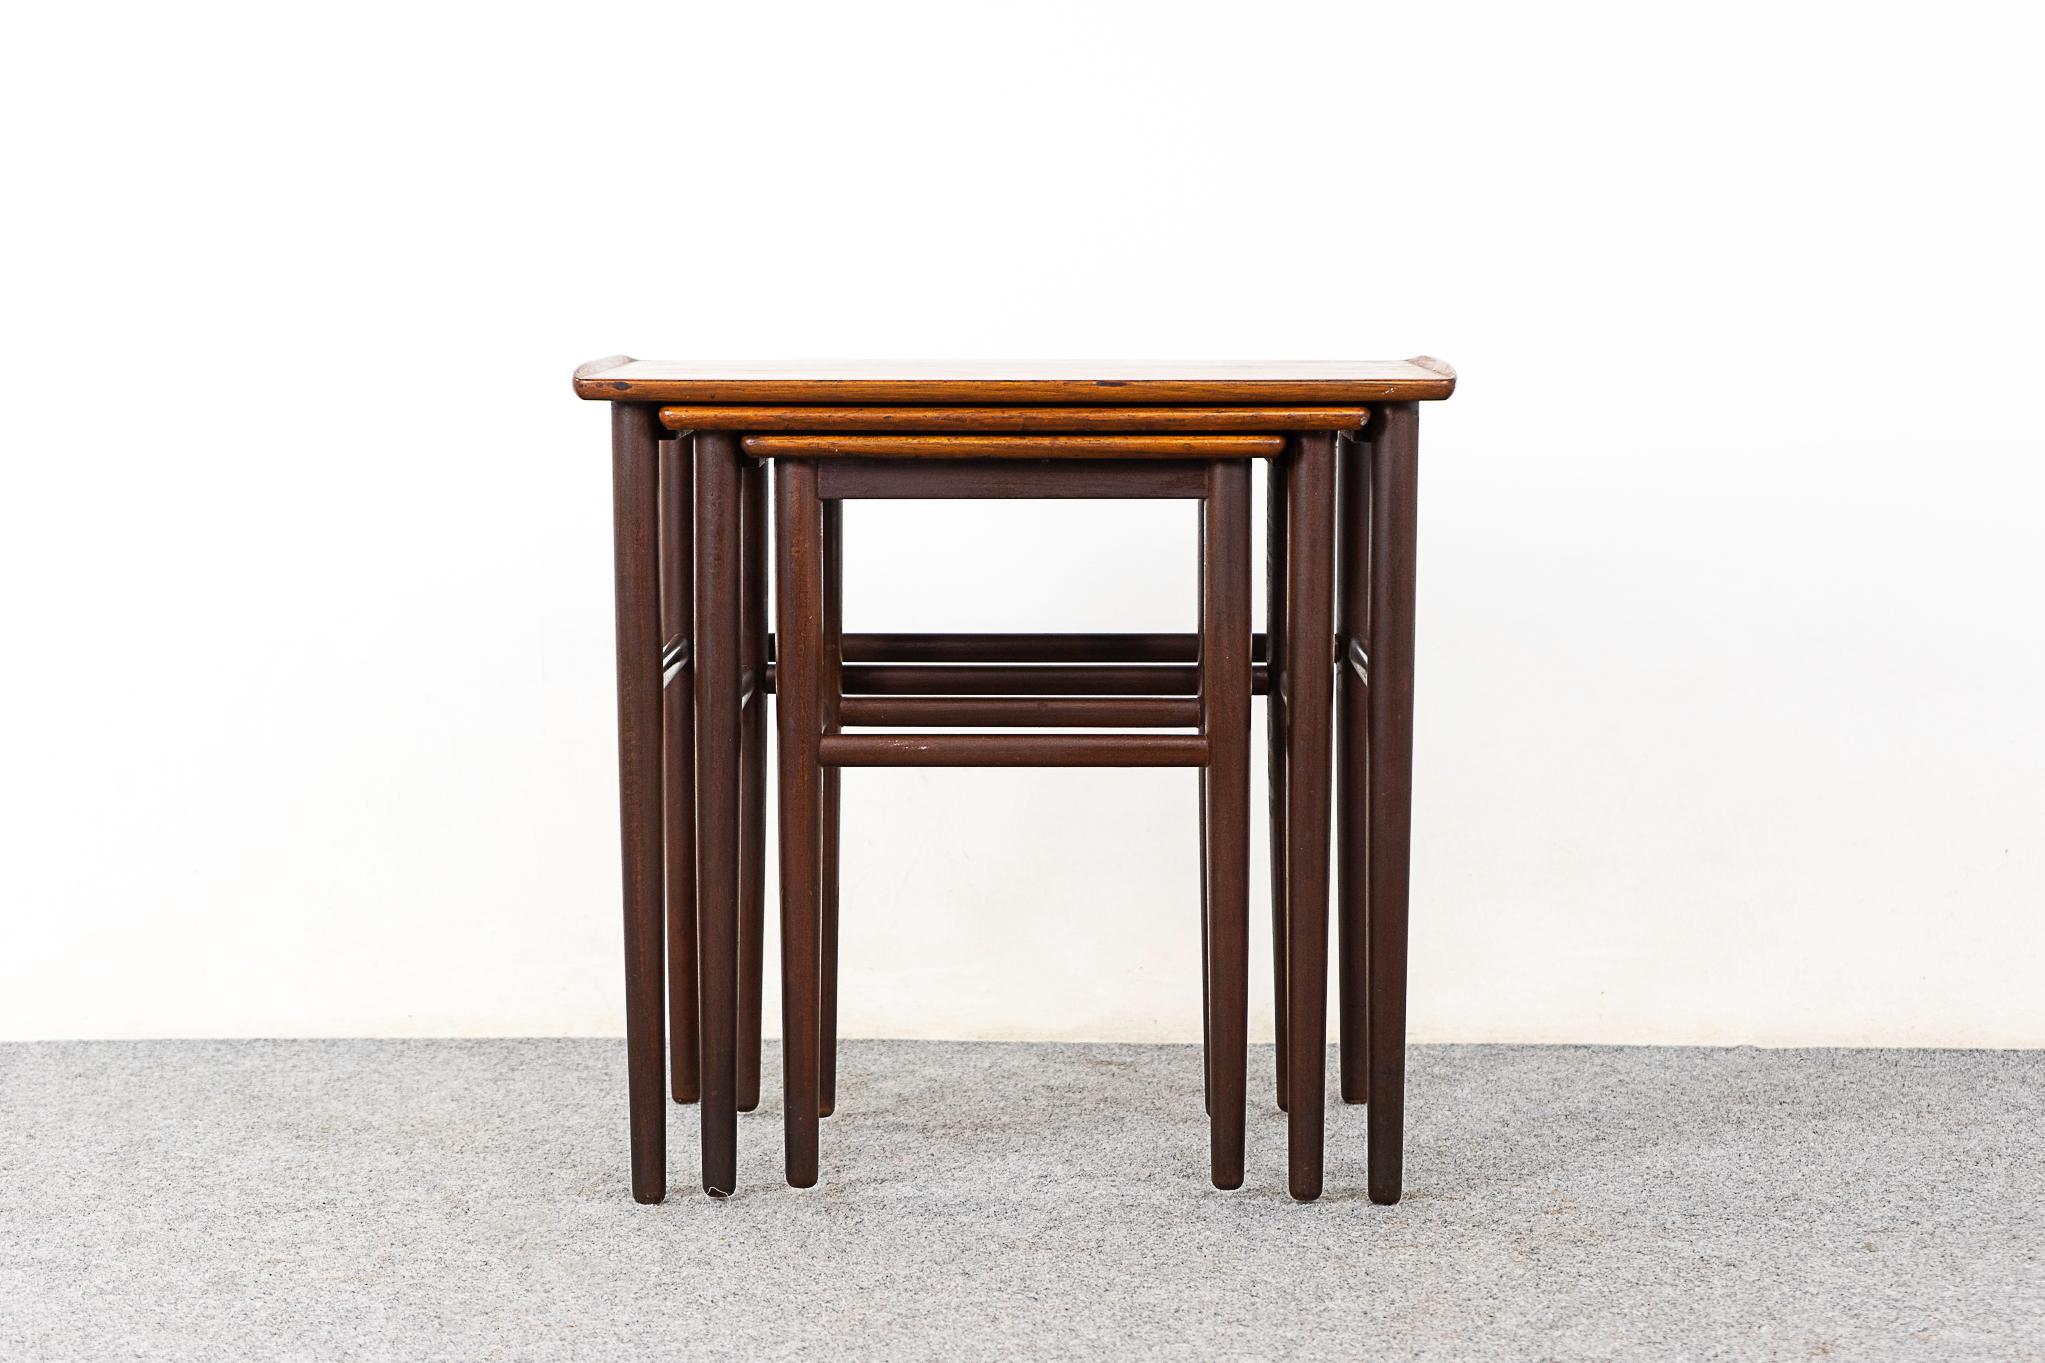 Rosewood nesting tables, circa 1960's. Gently curved edges add a touch of softness to the crisp, clean, minimalist lines. Compact space saving design with ample surfaces for serving or displaying.

Unrestored item, some marks consistent with